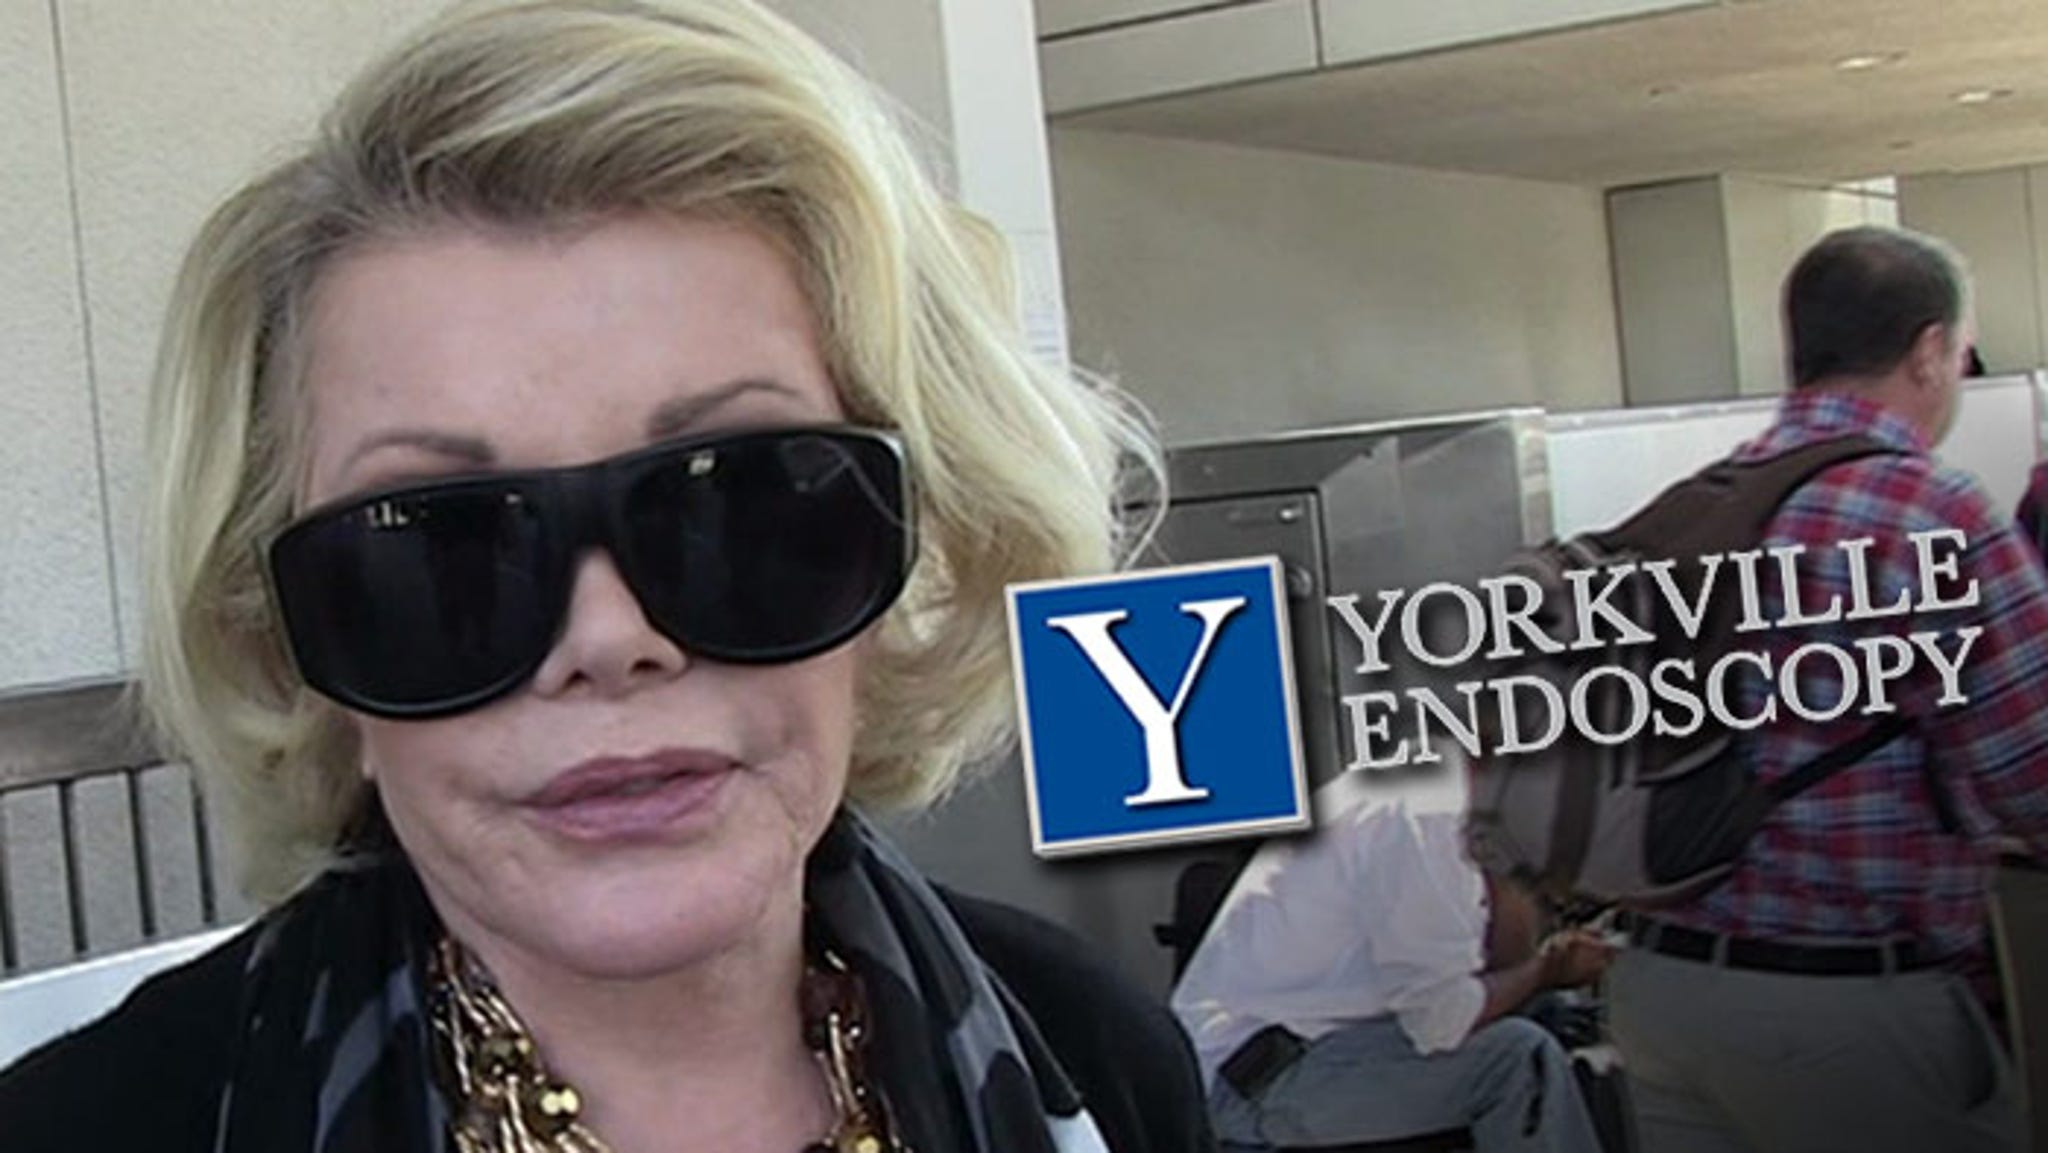 Joan Rivers Doctor Who Performed Throat Procedure Fired